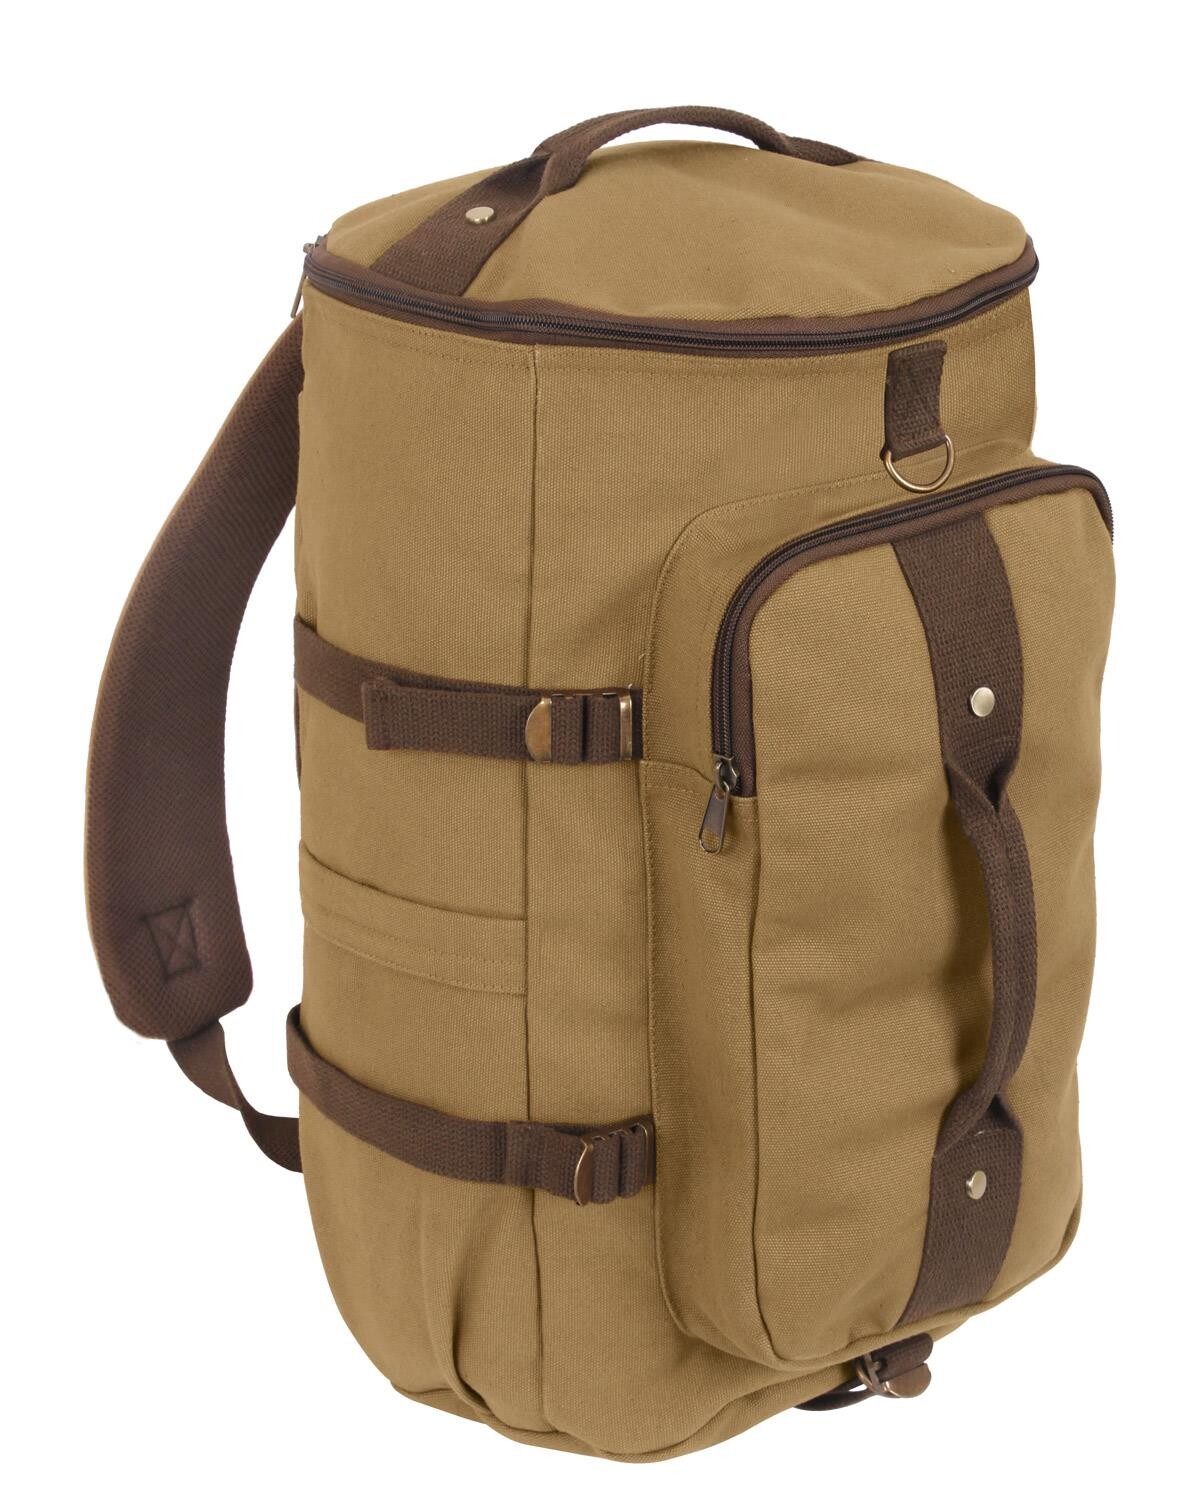 Rothco Convertible Canvas Duffle / Backpack (Coyote Brun, One Size)